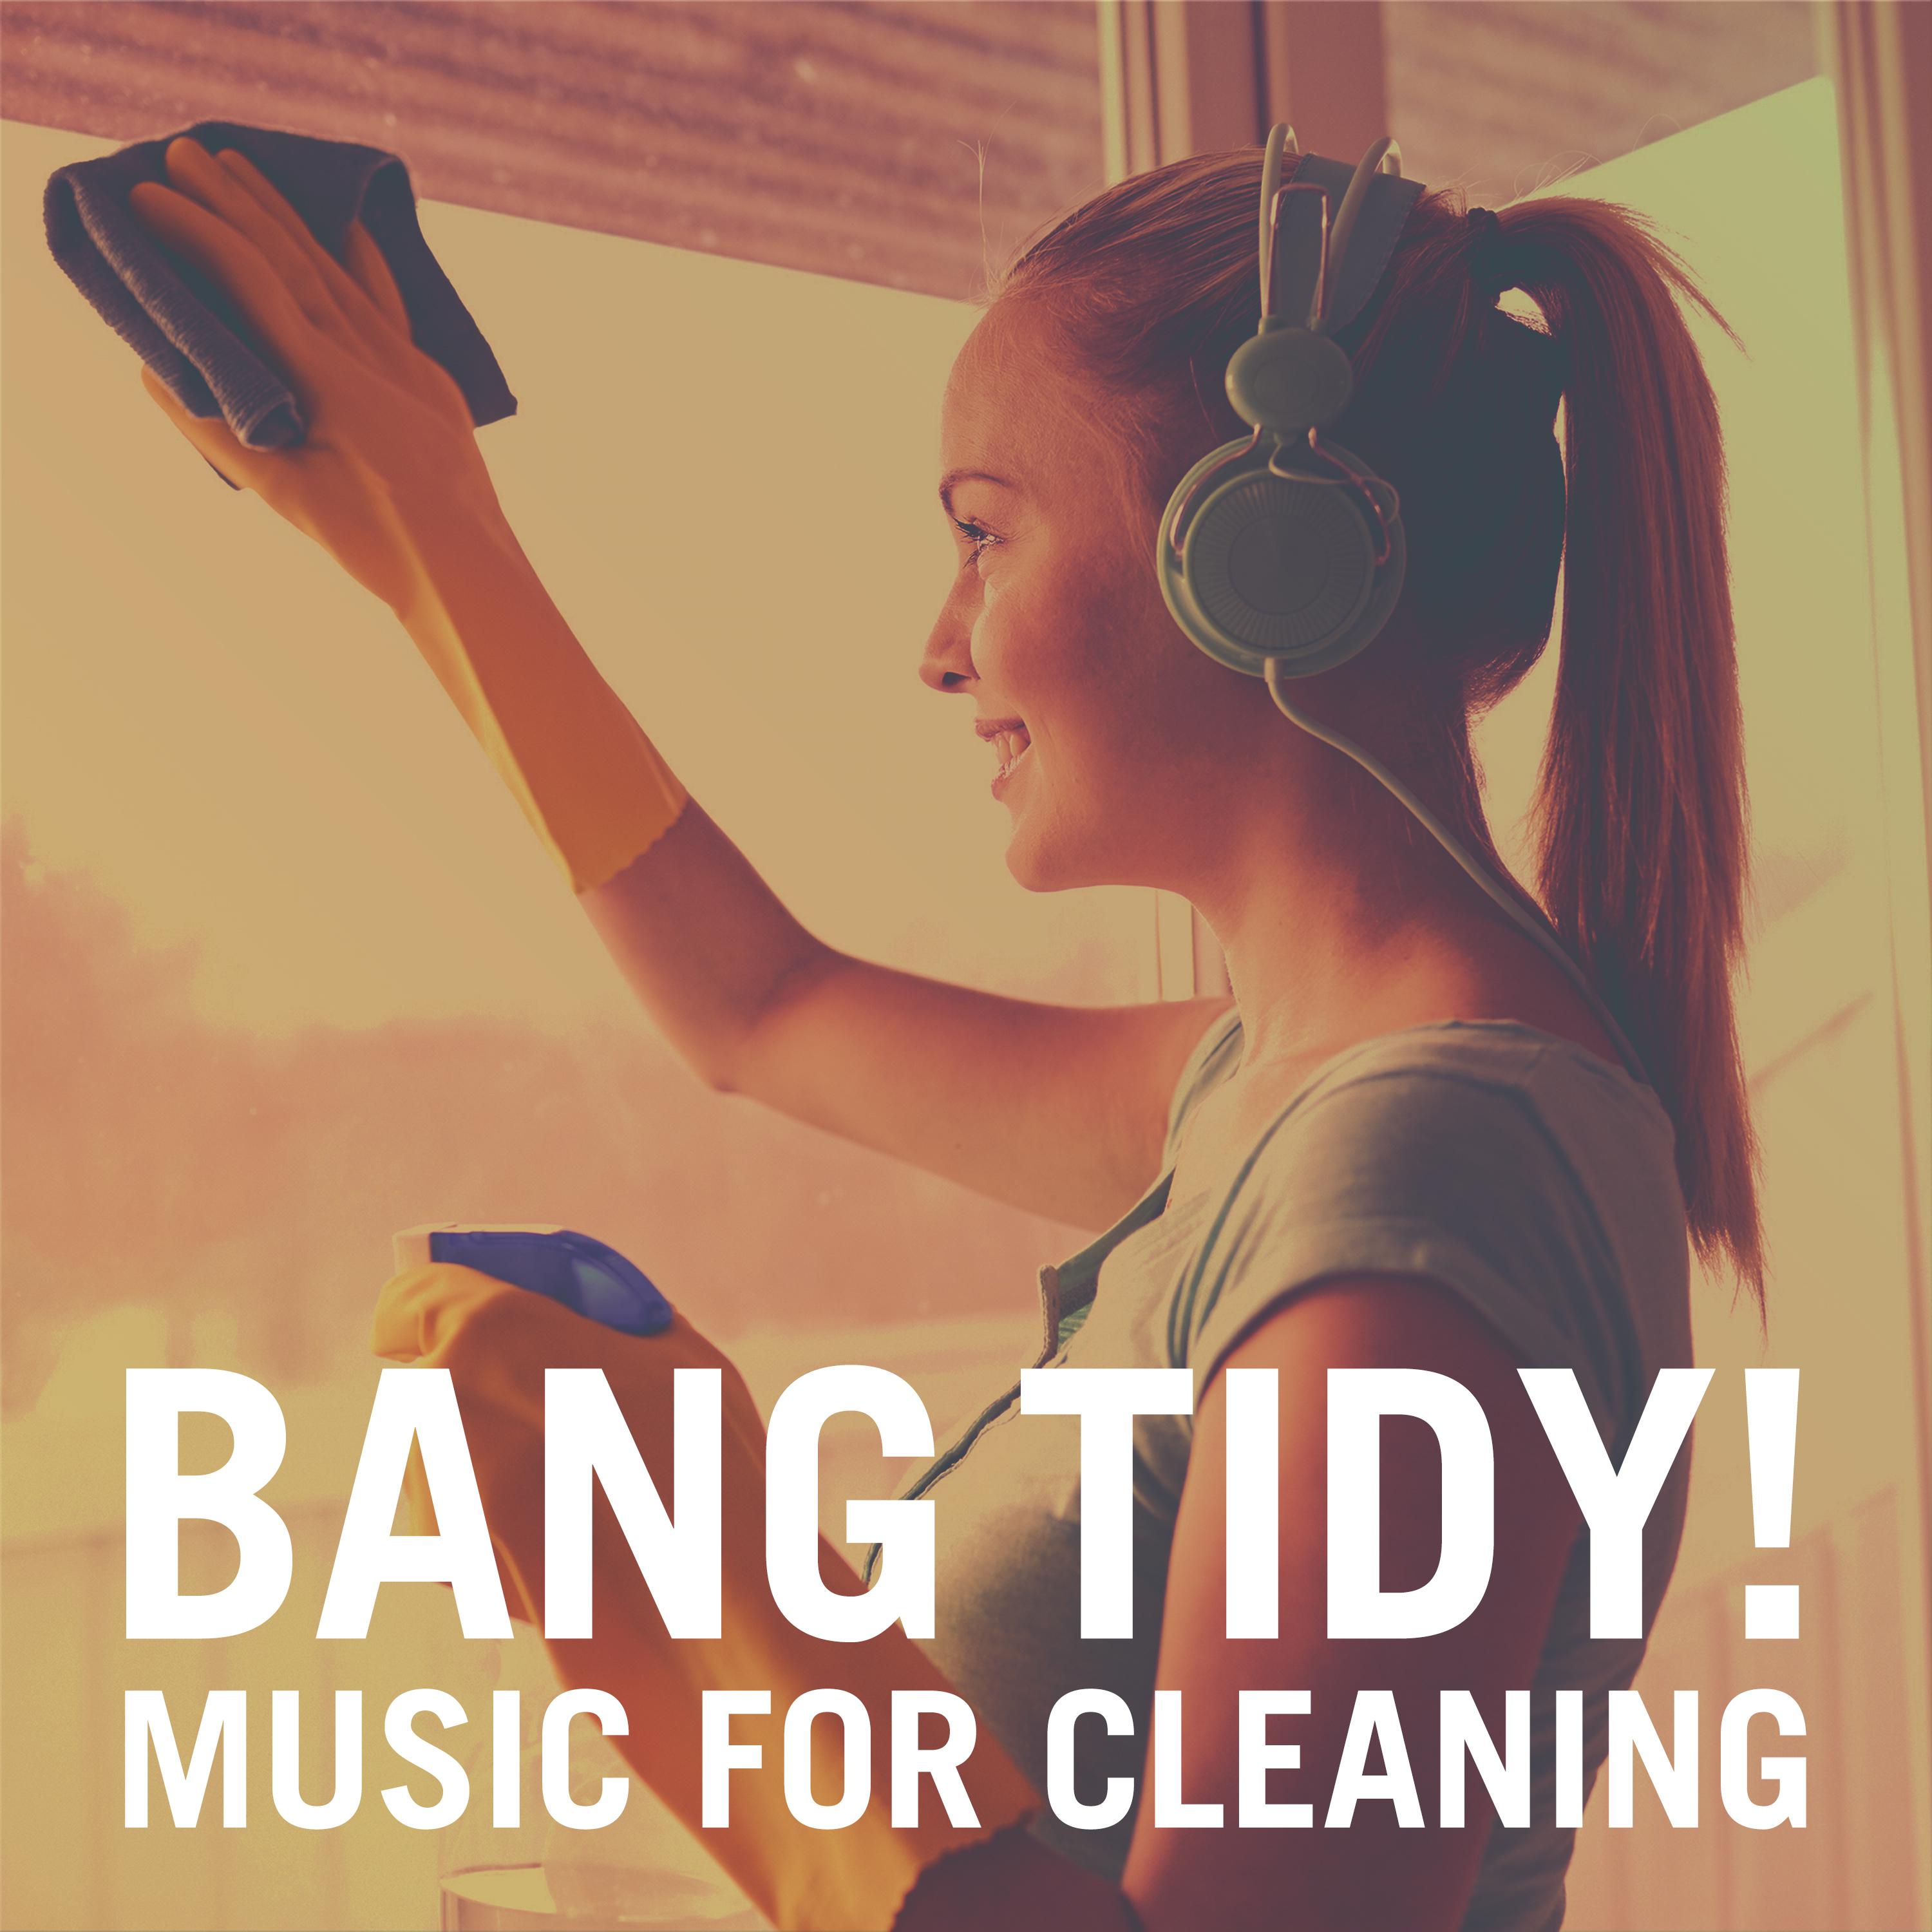 Bang Tidy! Music for Cleaning